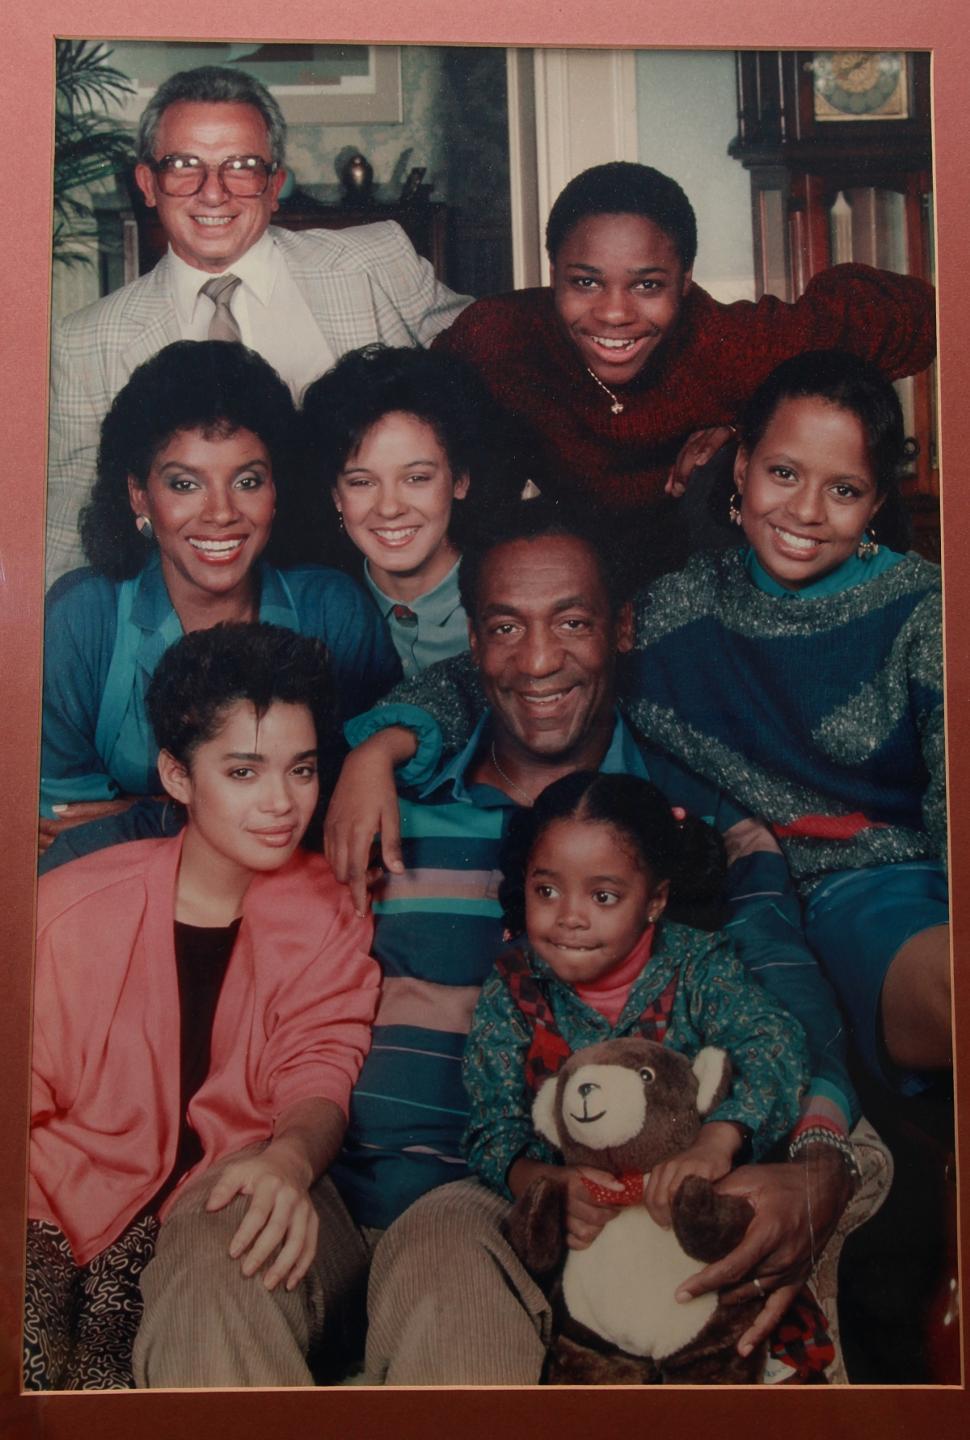 A cast photo of "The Cosby Show" hangs inside Frank Scotti's Lakewood, N.J. apartment.